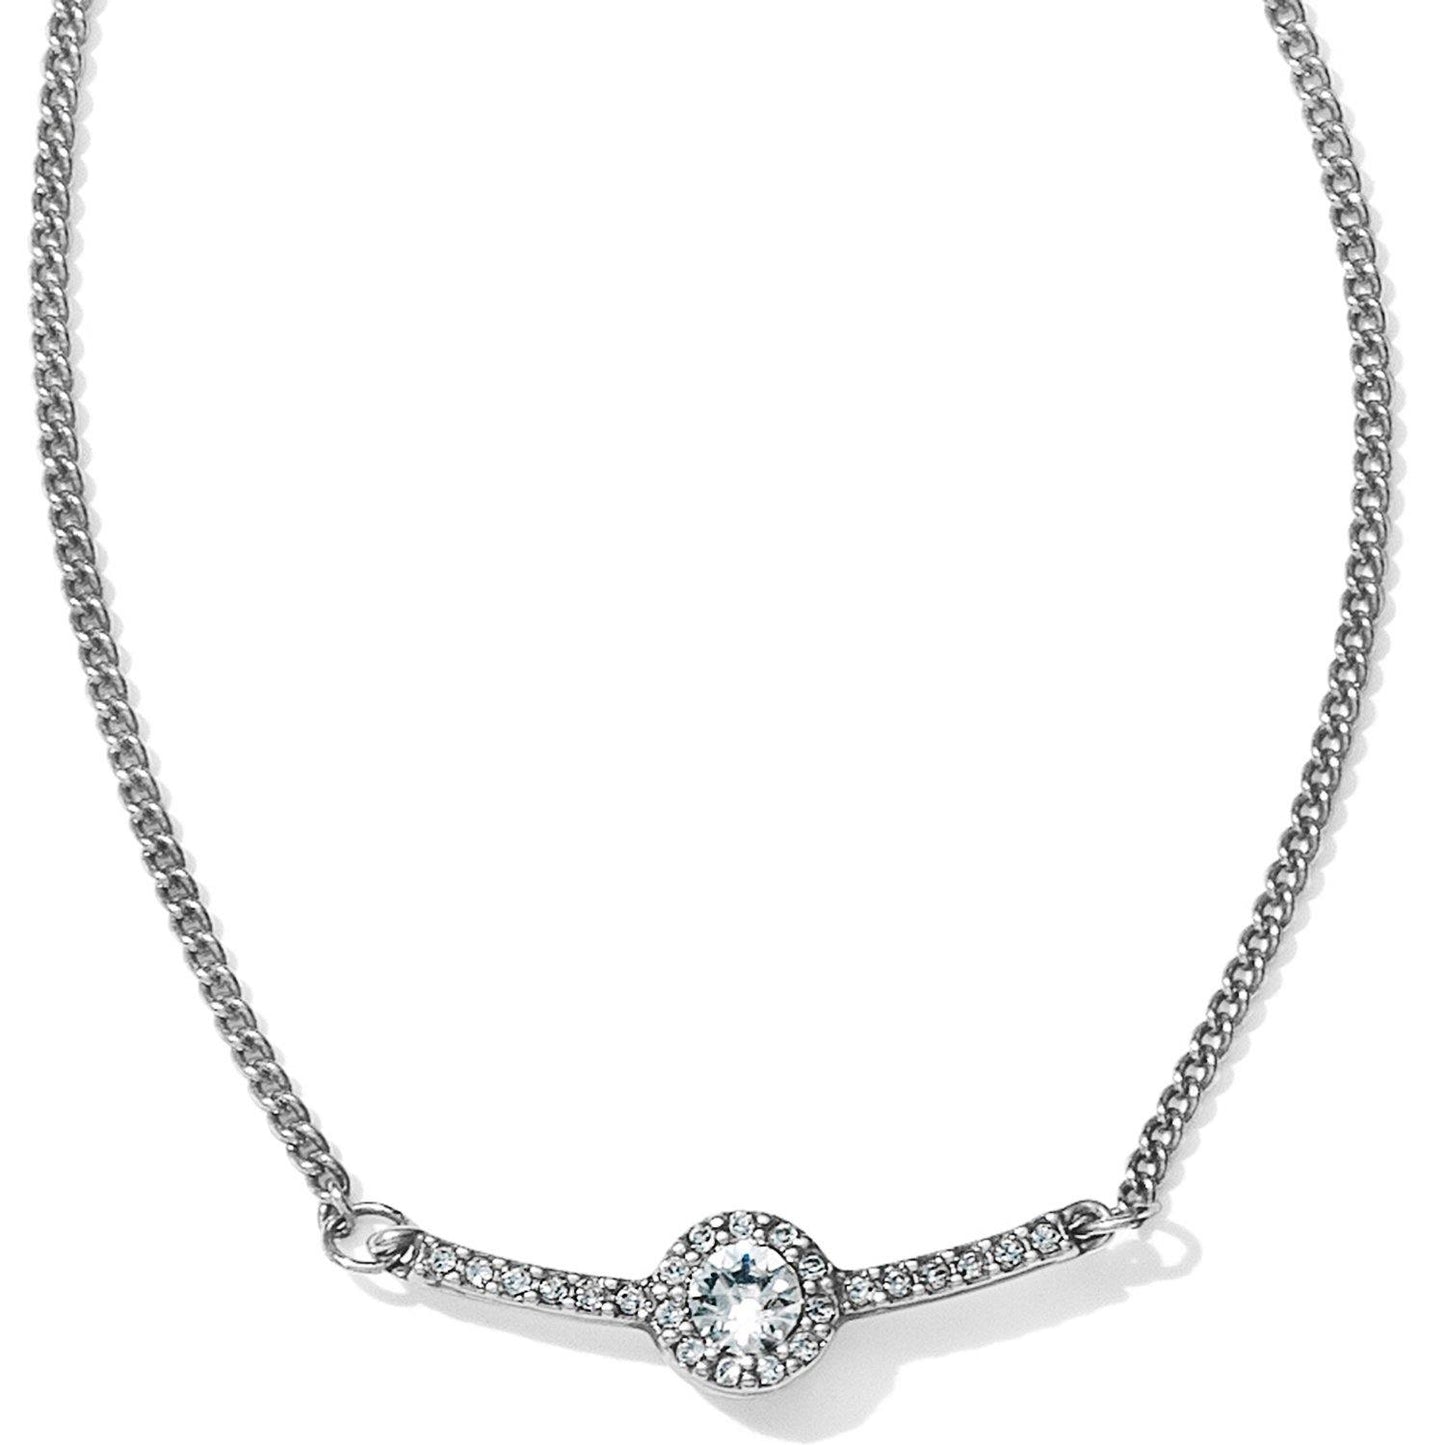 Brighton Illumina Bar Necklace - Gals on and off the Green